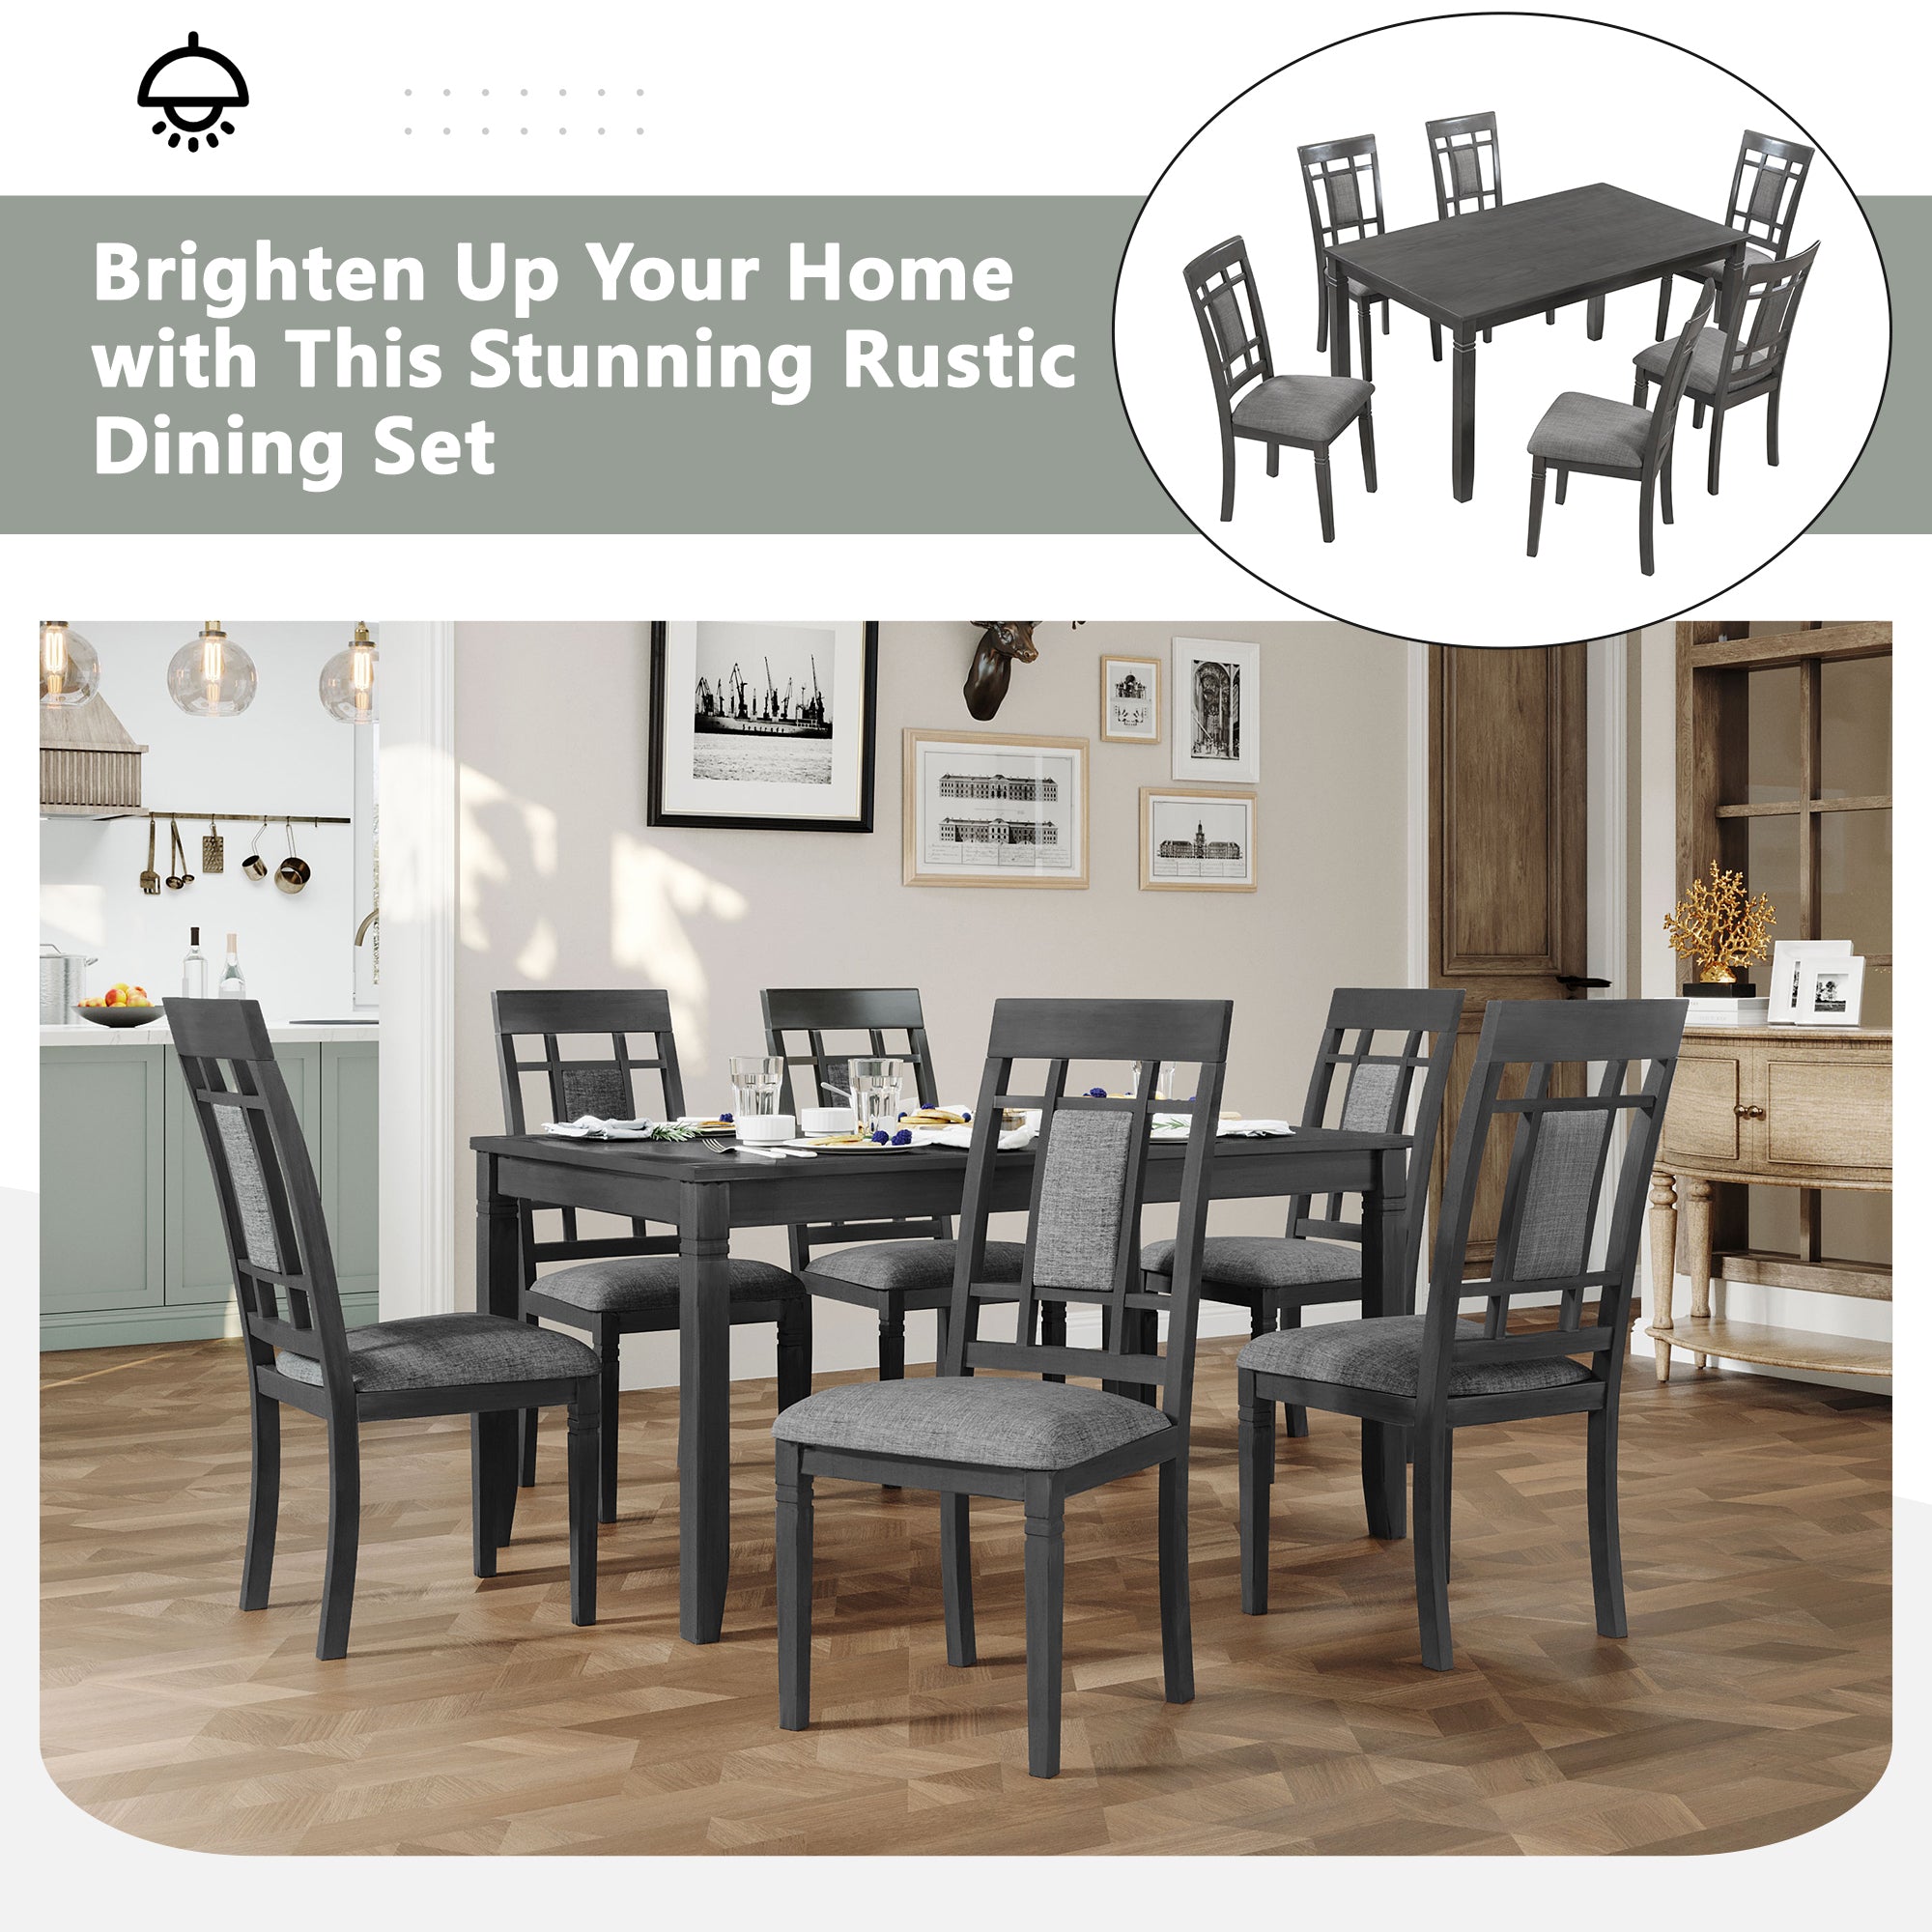 TOPMAX 7-Piece Farmhouse Rustic Wooden Dining Table Set Kitchen Furniture Set with 6 Padded Dining Chairs (Gray)